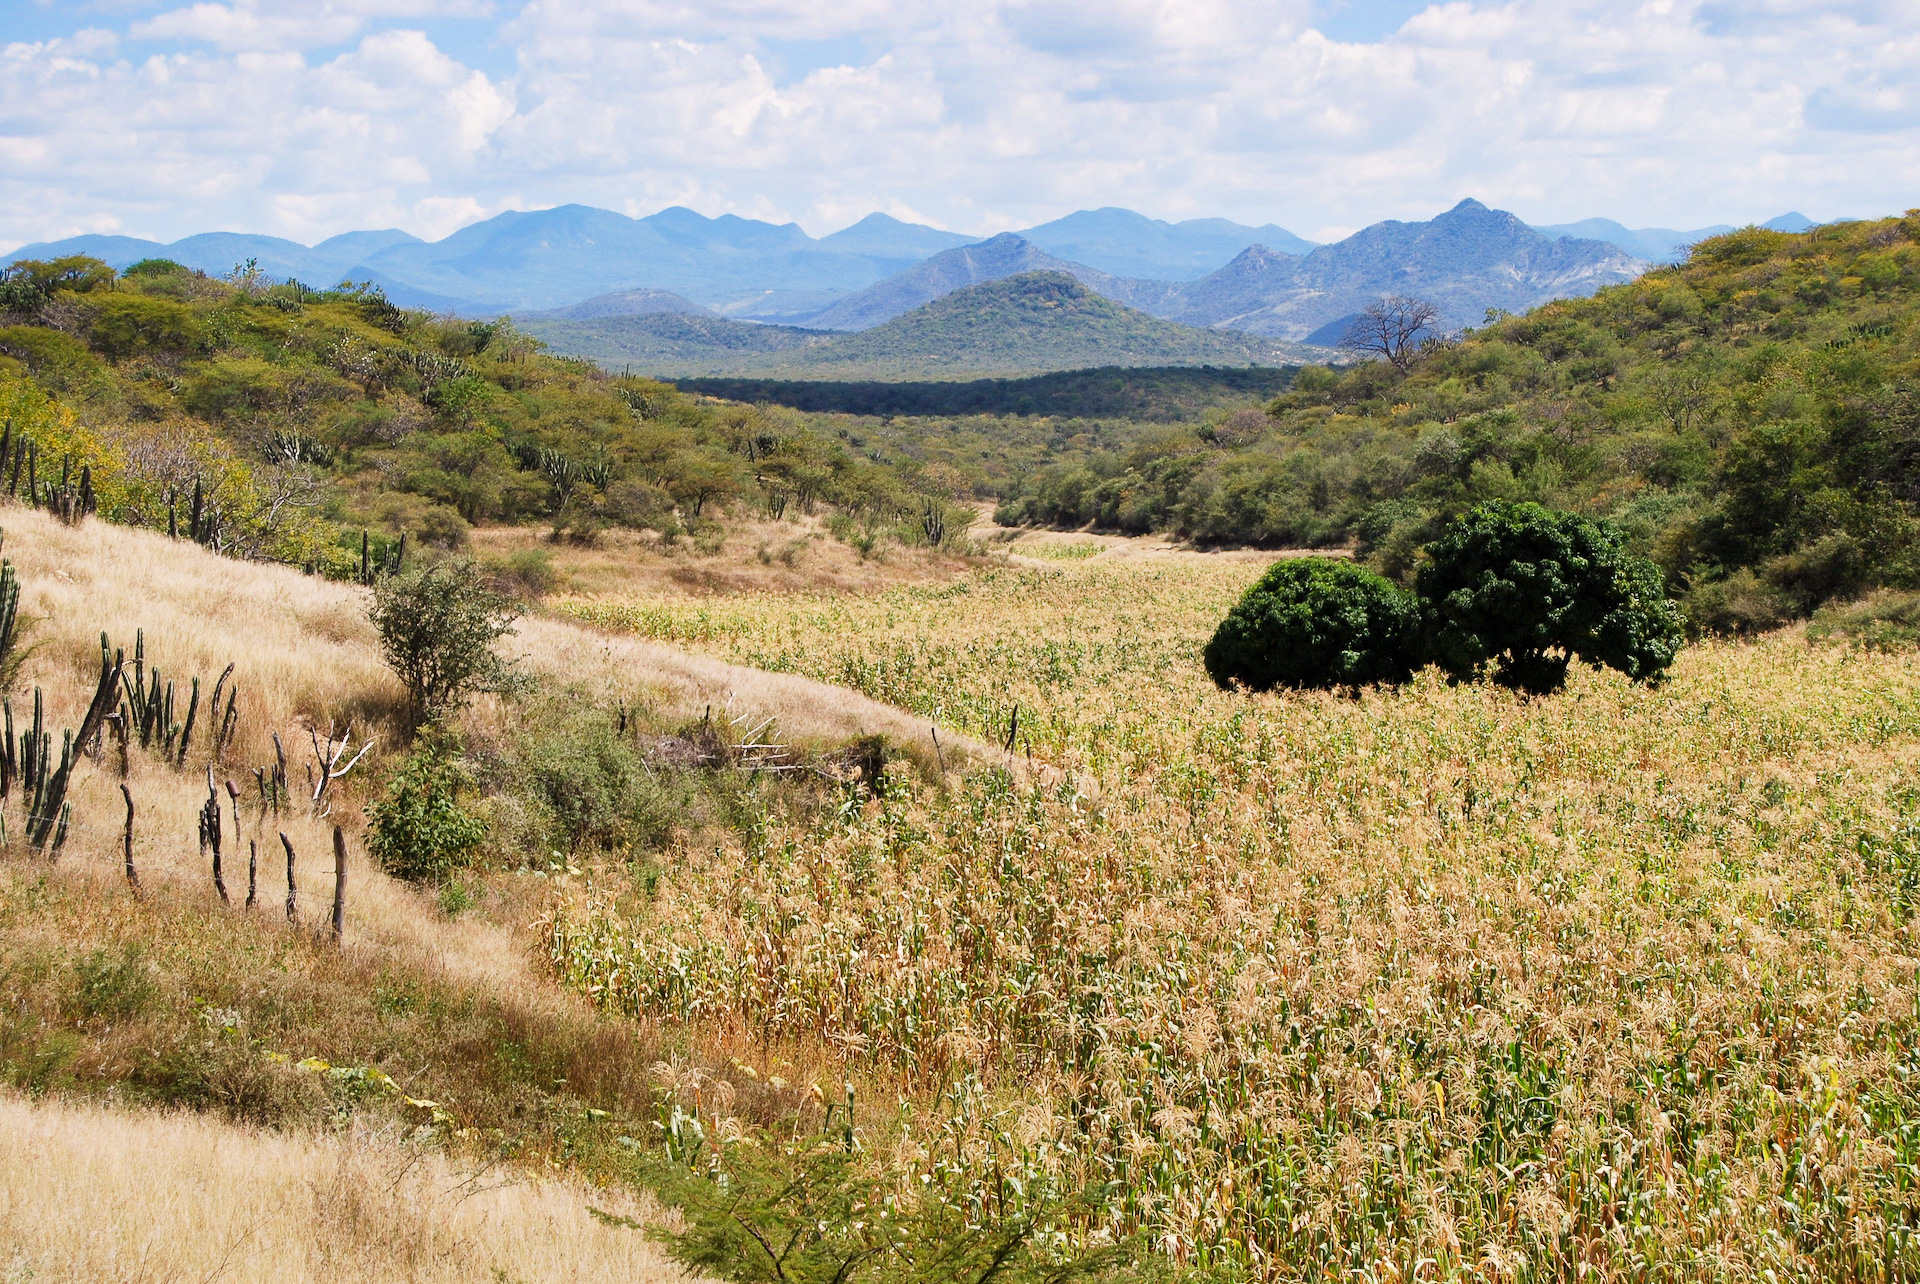 In the dry and mountainous terrain surrounding the village of Tonahuixtla, native maize preservation and reforestation efforts have been key in protecting the local environment and culture. (Photo: Denise Costich/CIMMYT)